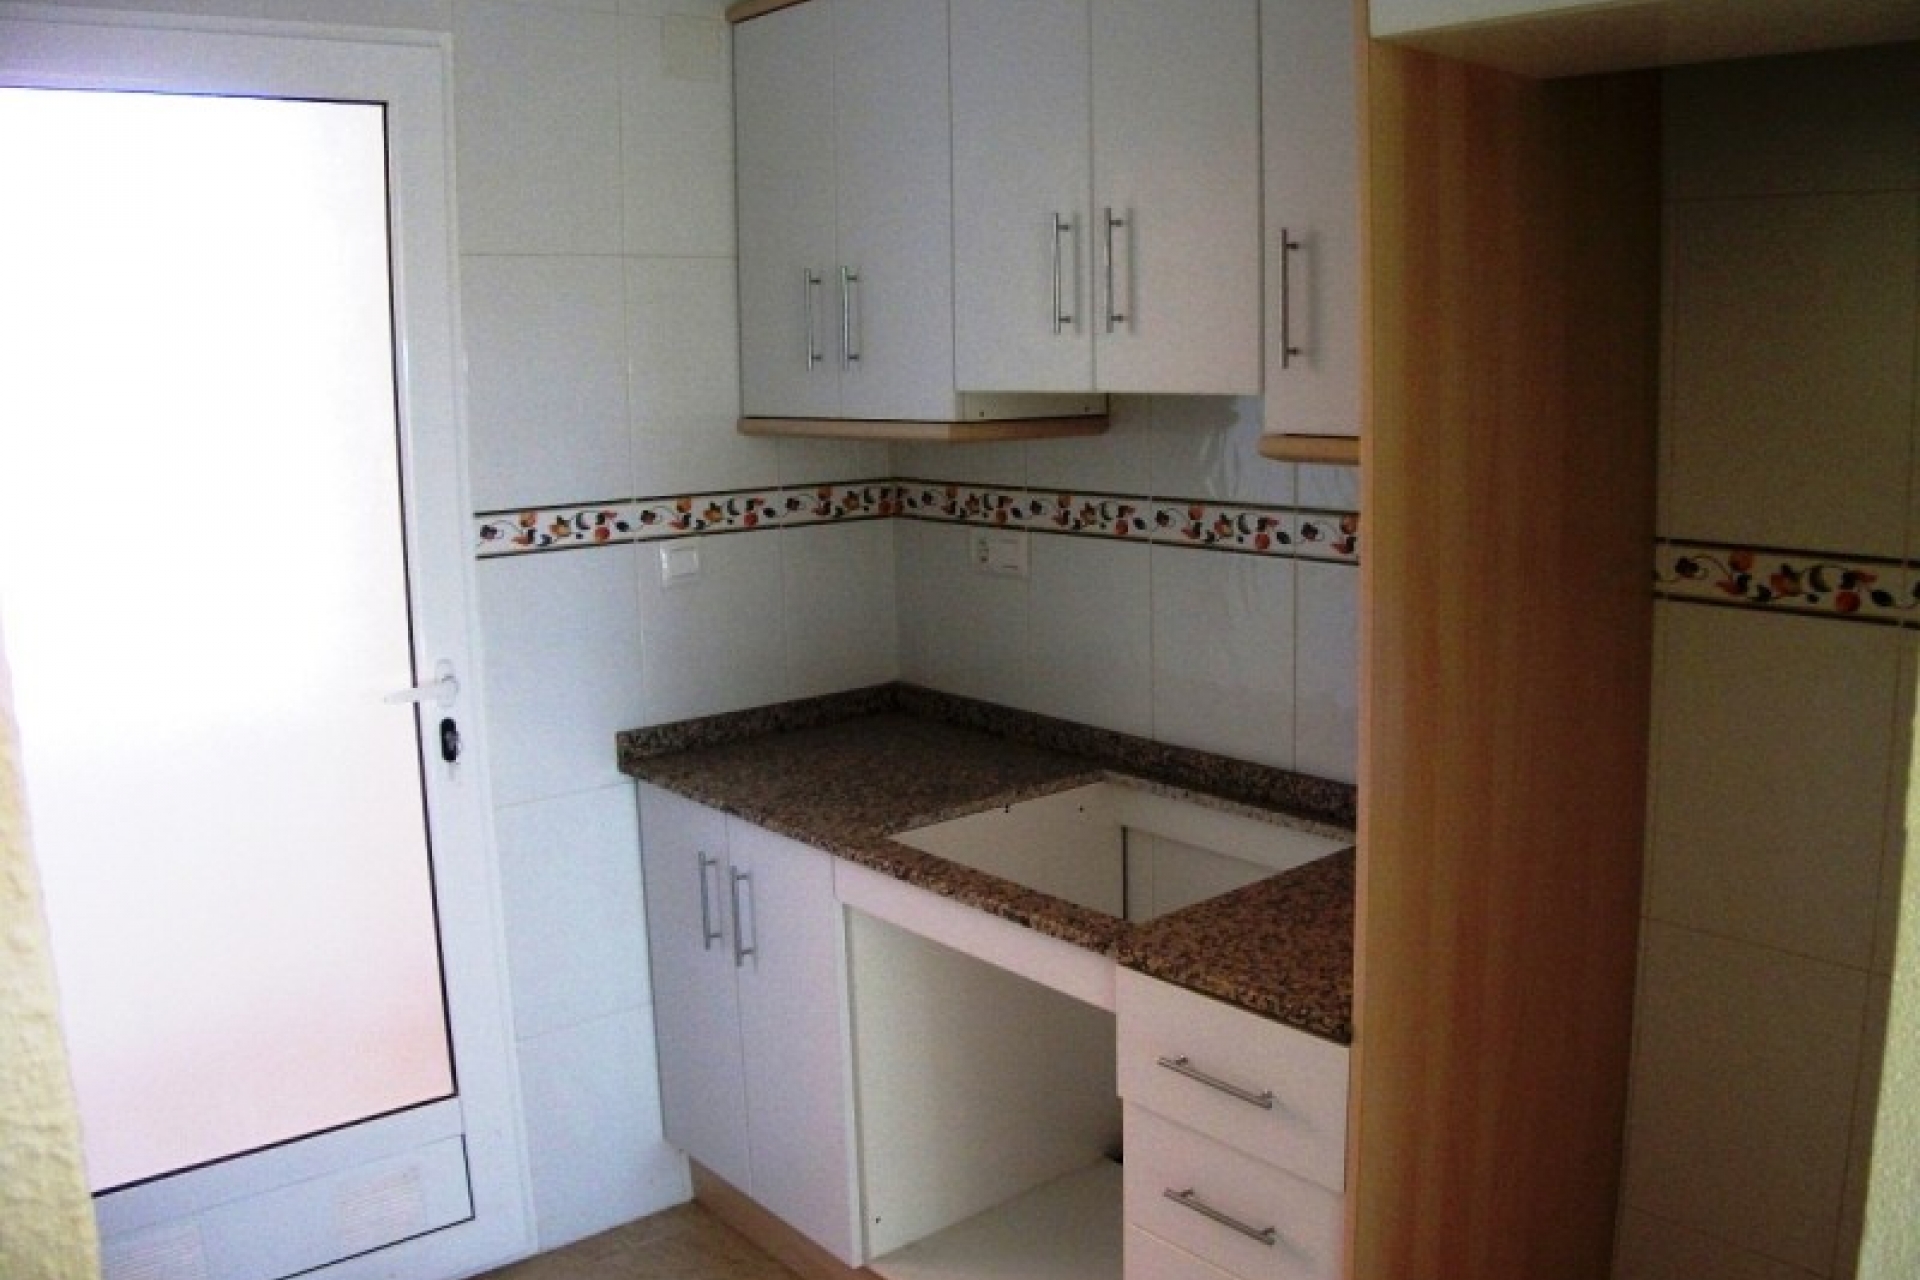 Sa Miguel cheap bargain property for sale, cheap property in San Miguel near Los Montesinos and Torrevieja, Costa Blanca